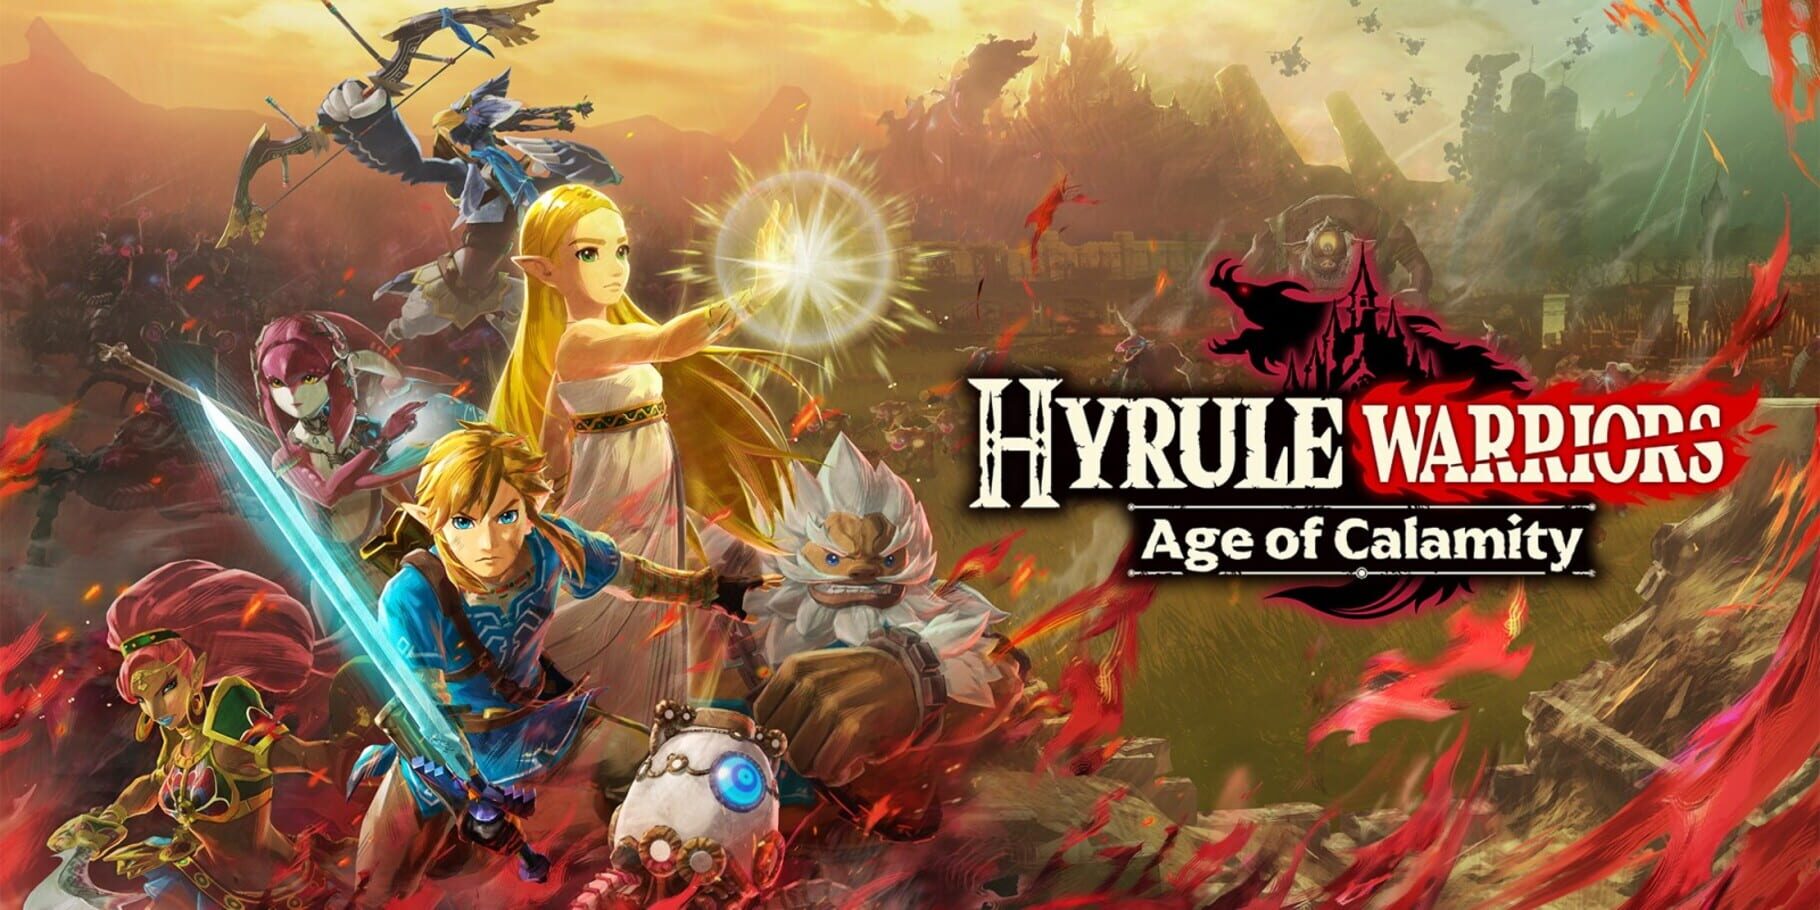 Artwork for Hyrule Warriors: Age of Calamity